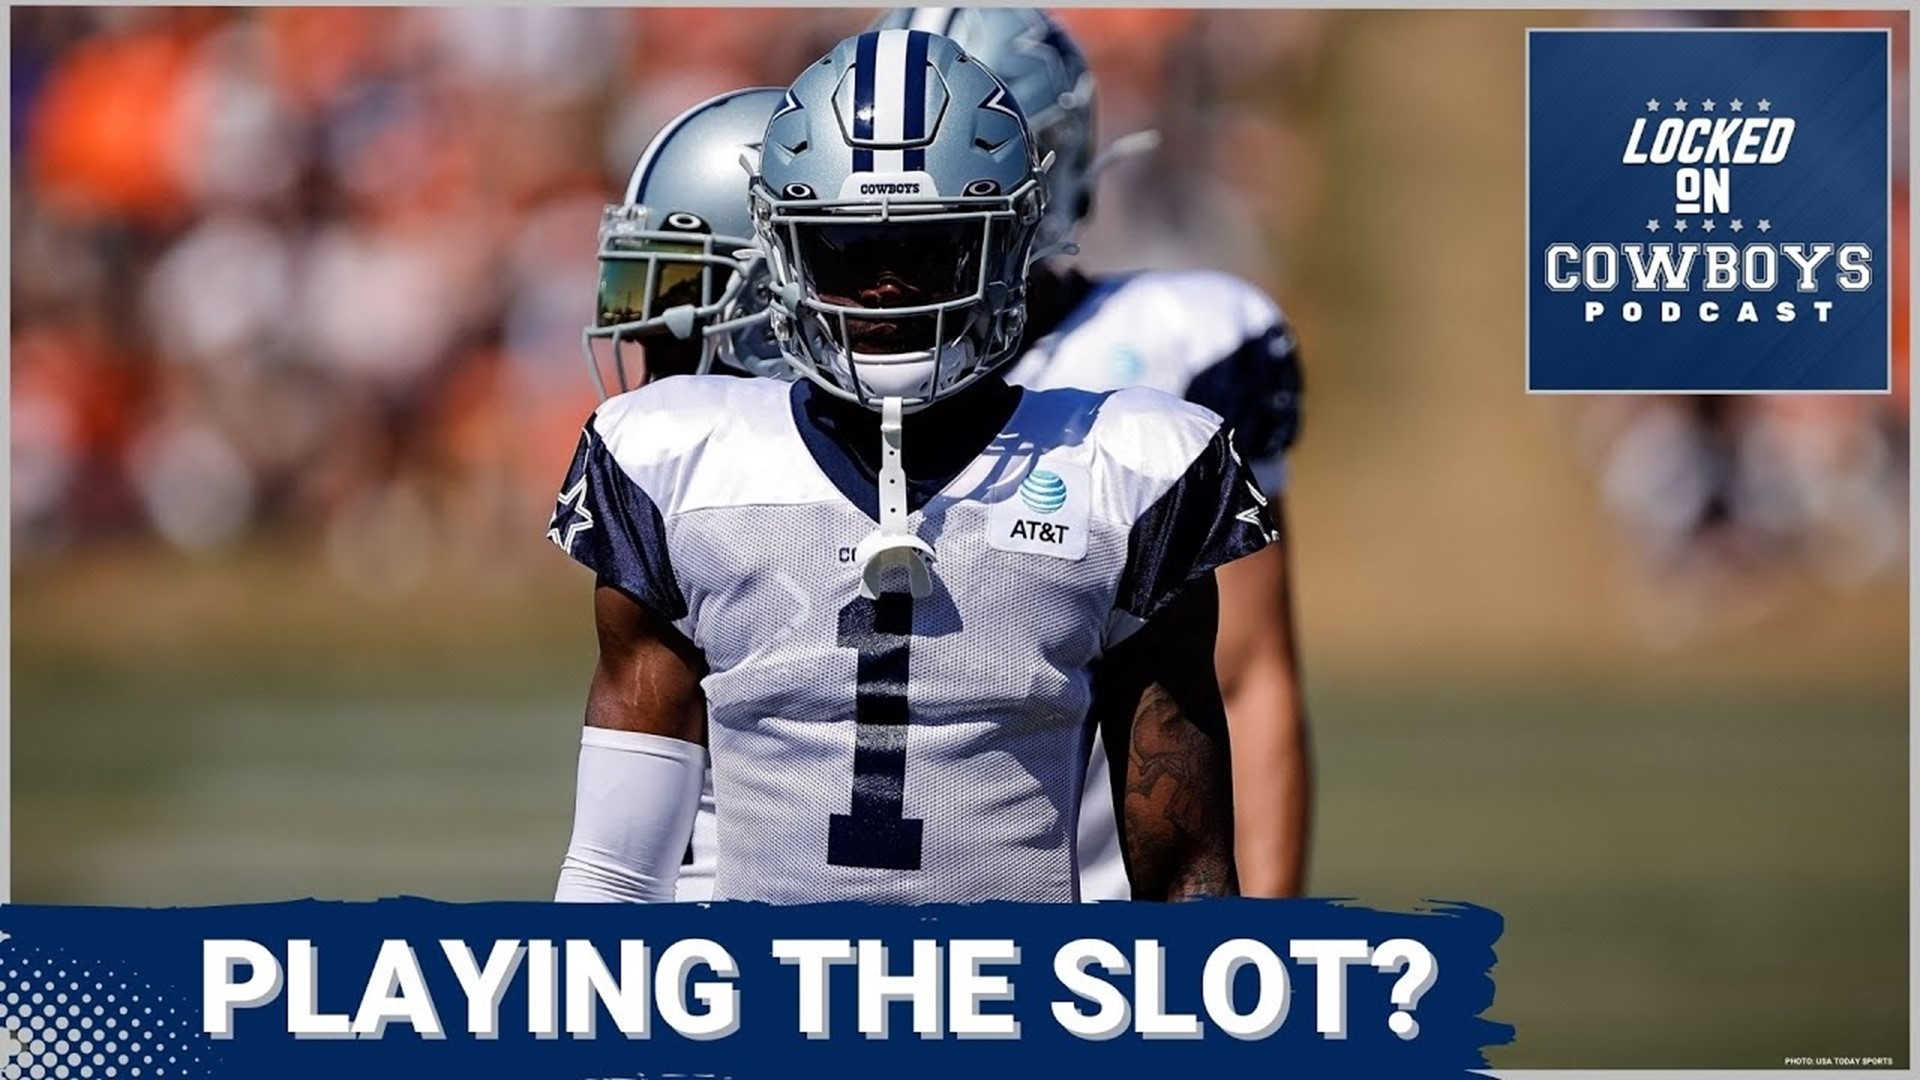 Marcus Mosher and Landon McCool discuss the latest news and notes from Dallas Cowboys OTAs. Could Kelvin Joseph start in the slot?